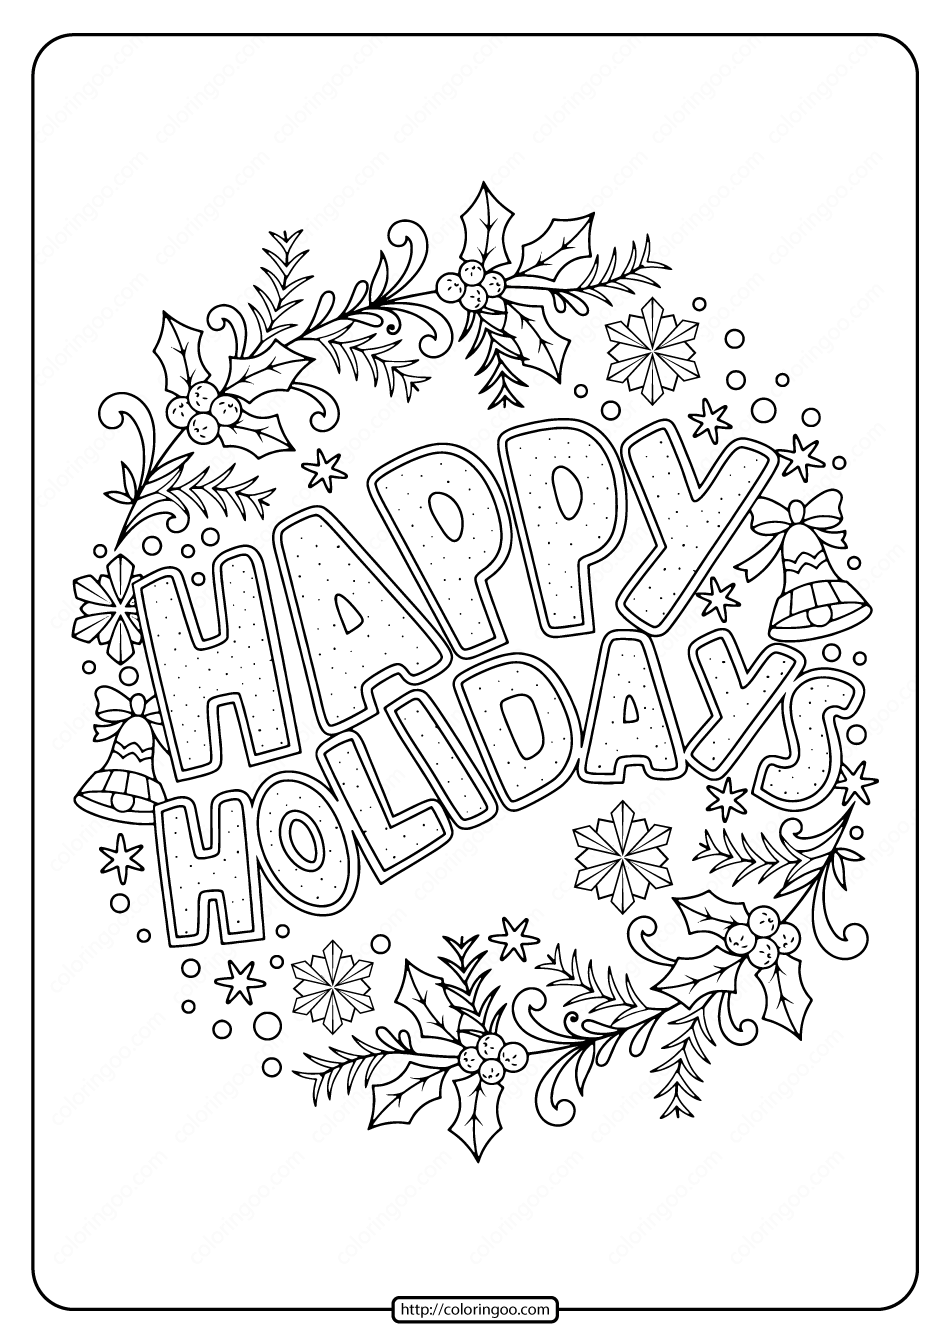 Happy Holidays Coloring Pages - Free Printable Coloring Pages for Kids